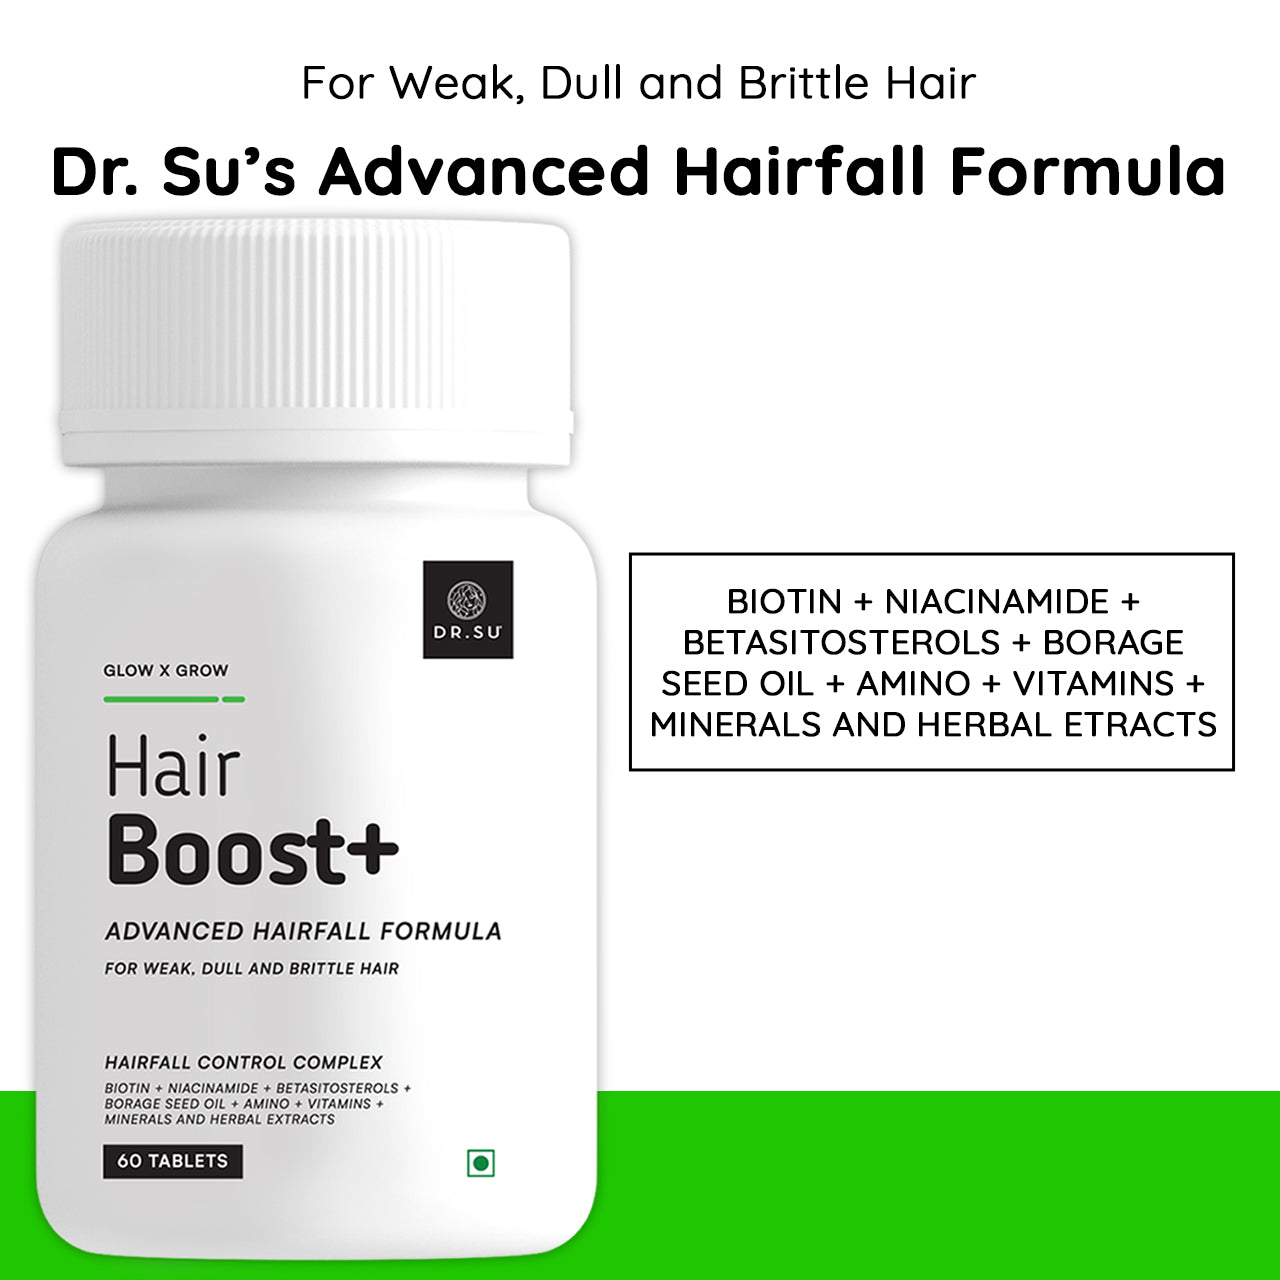 Dr. Su Hairboost+ for Hair Strength